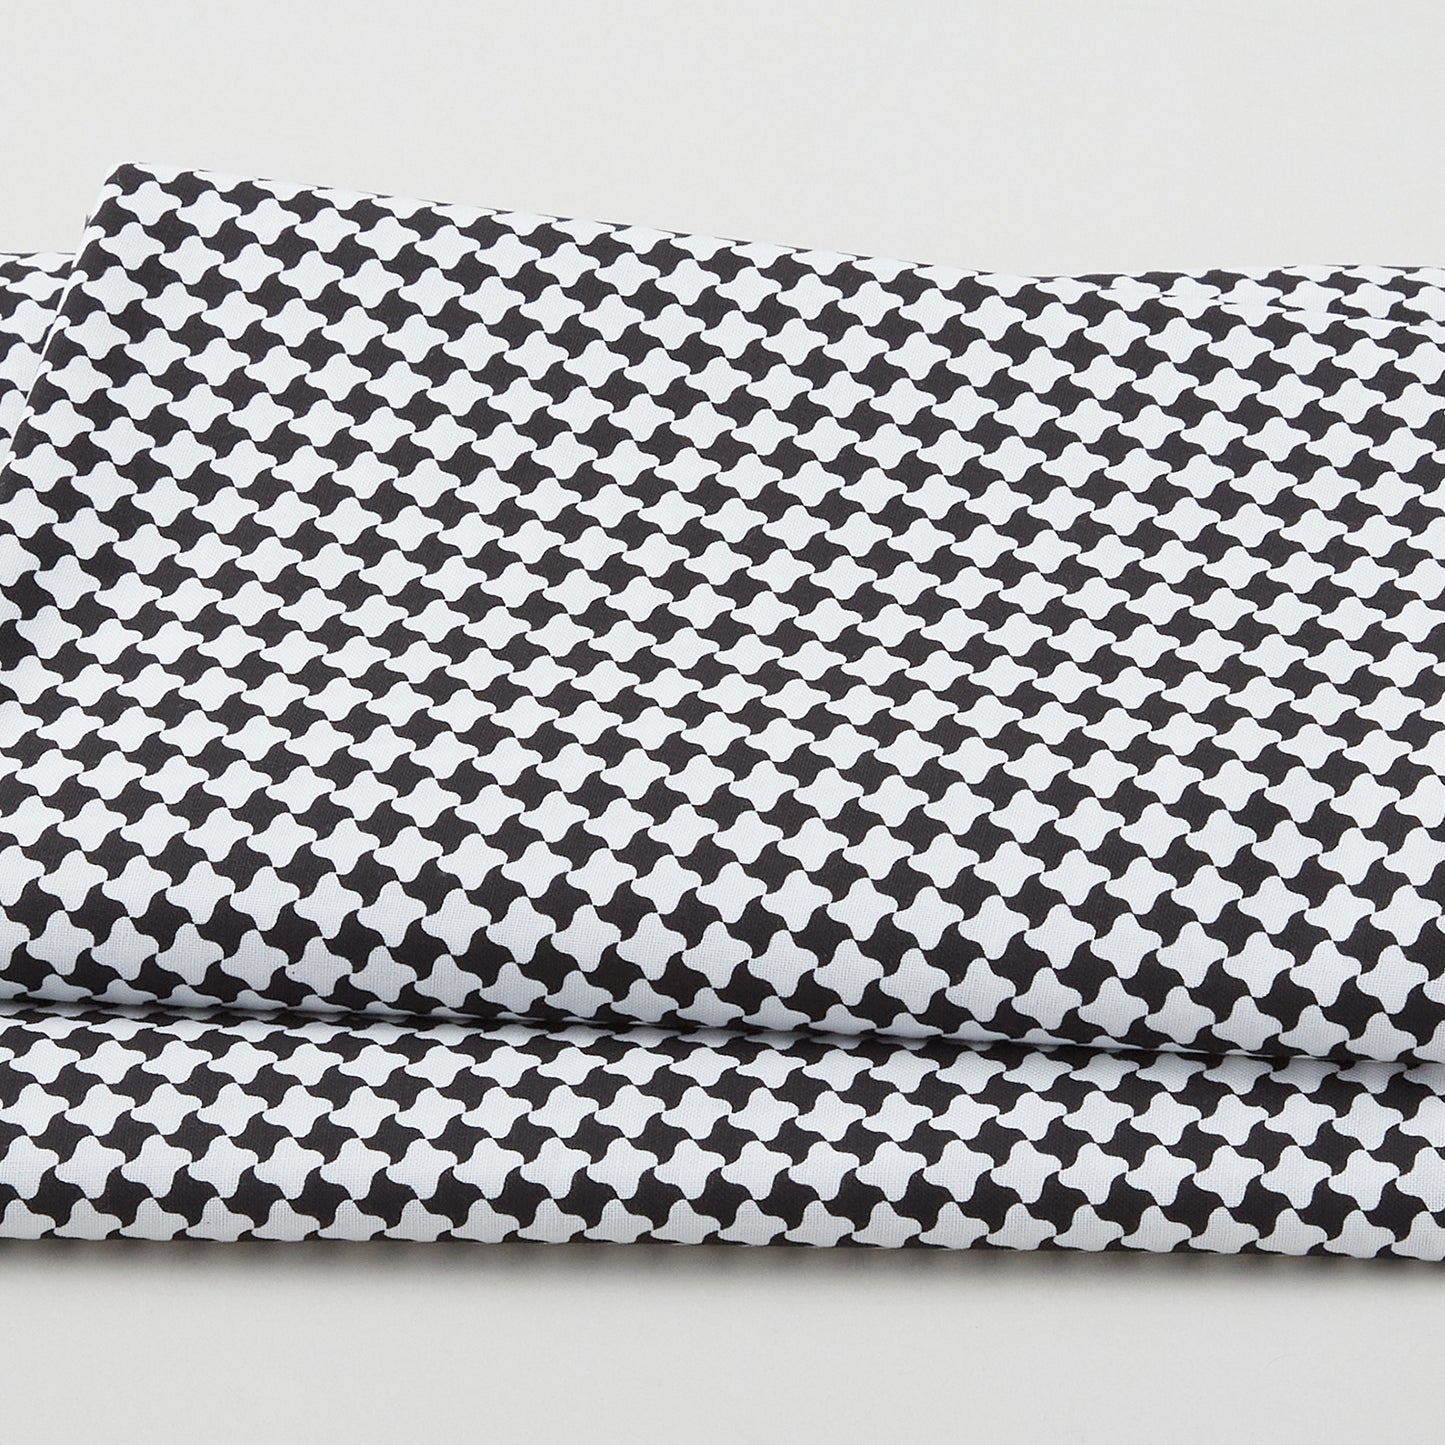 Polka & Plaid Party - Floats Black/White 3 Yard Cut Primary Image